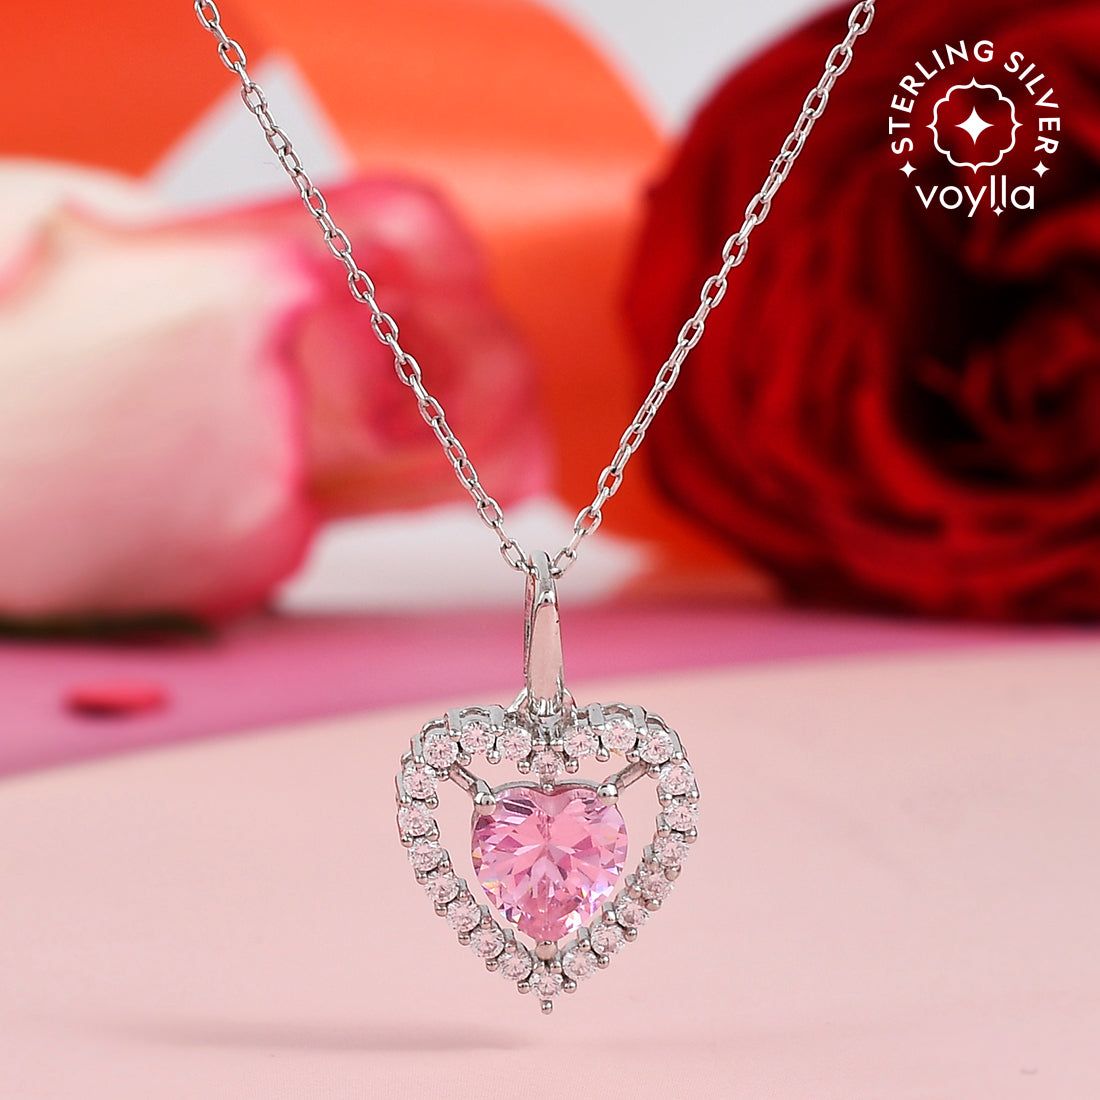 CLARA 925 Sterling Silver Pink Heart Pendant Chain Necklace Rose Gold